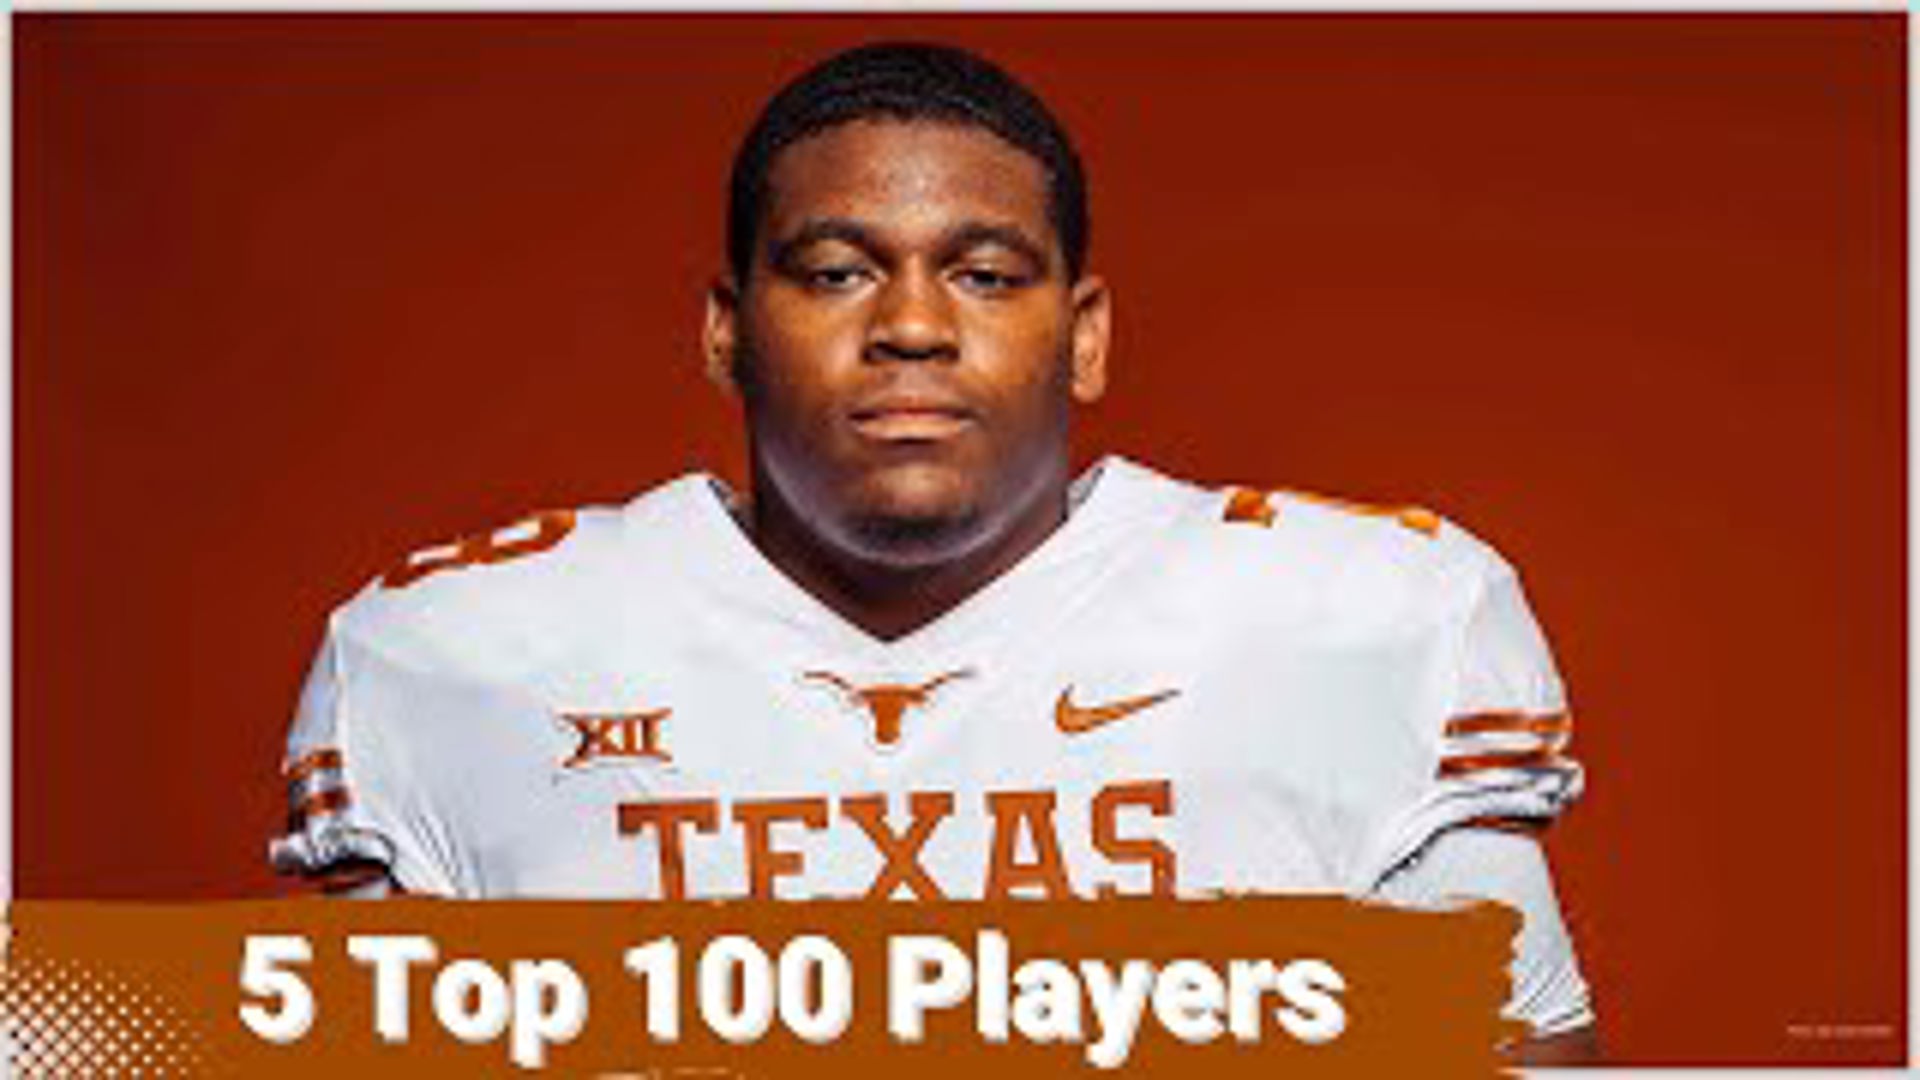 The Texas Longhorns are a national championship contender for a variety of reasons, but the most important one is they have really good players.